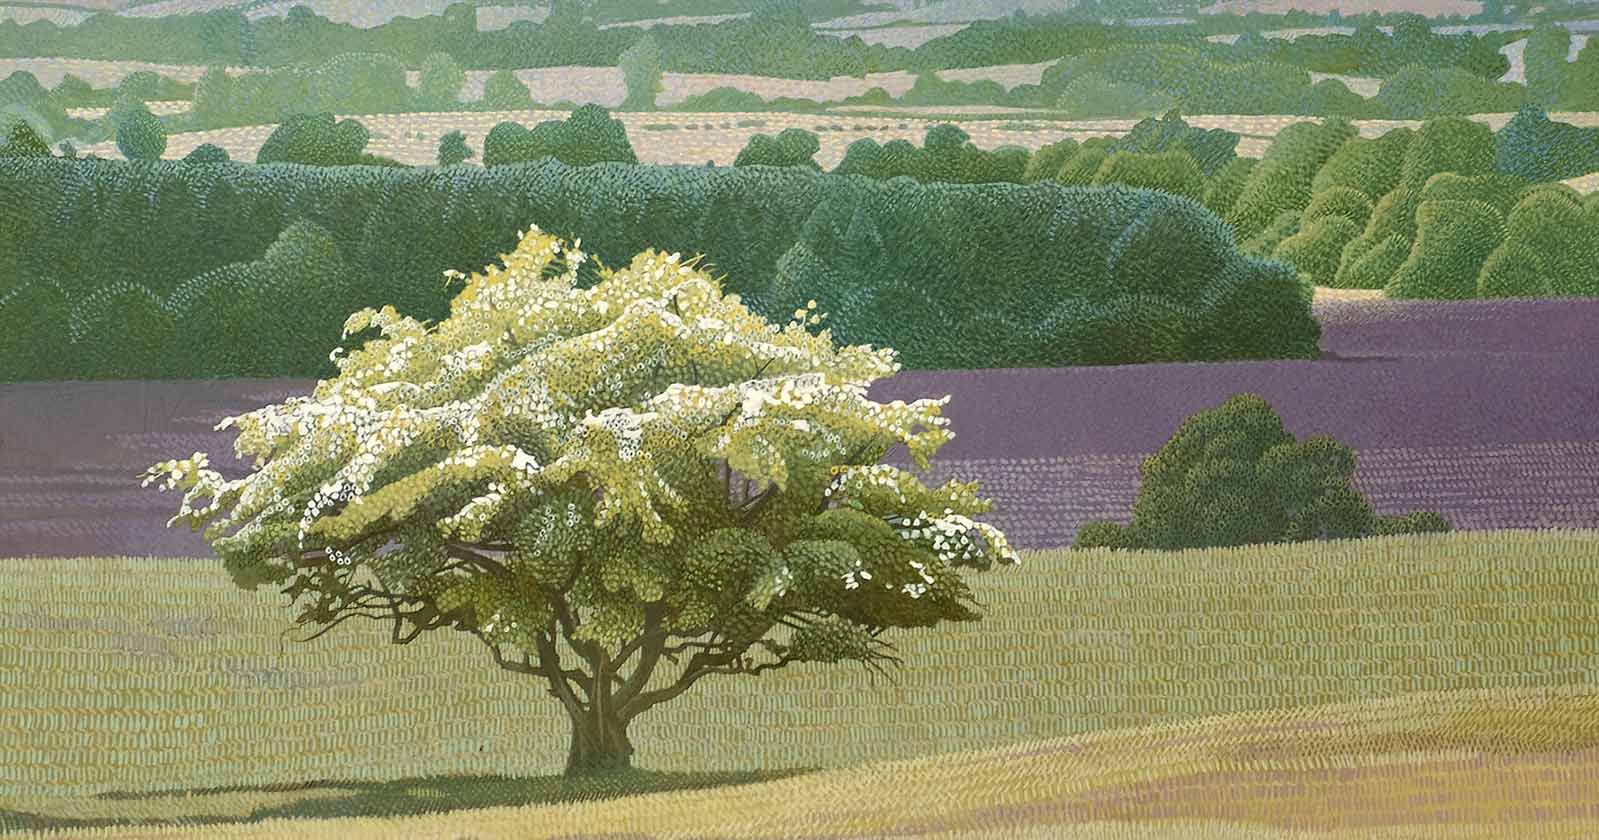 Annie Ovenden biography image